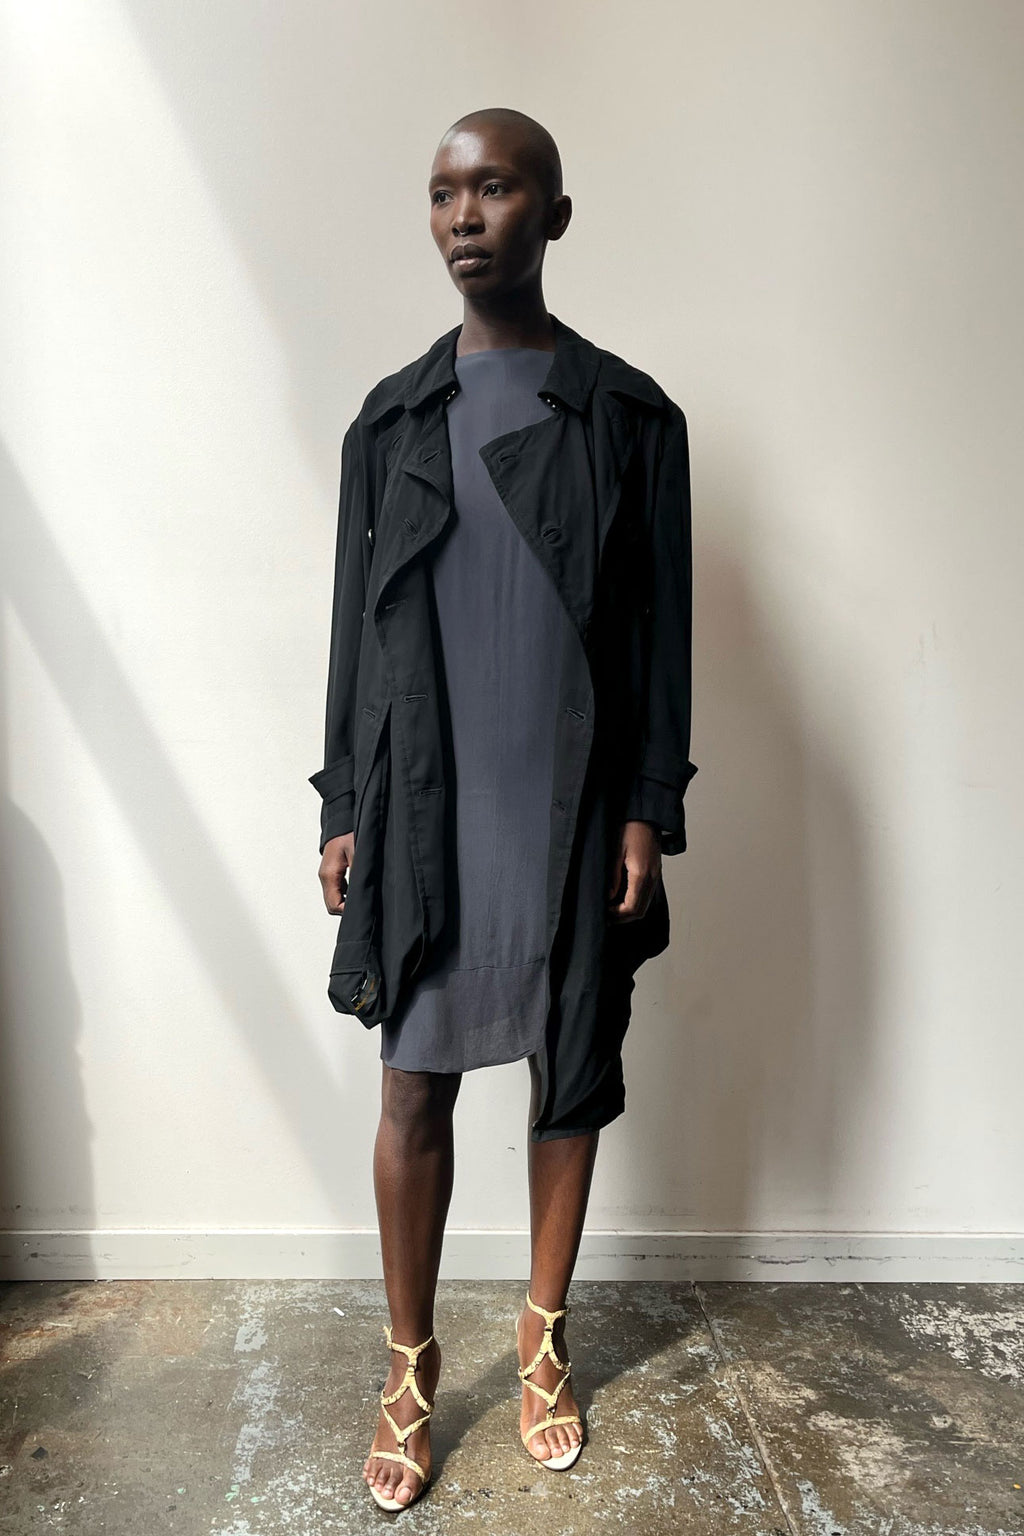 Comme des Garcons black woven chiffon sheer trench